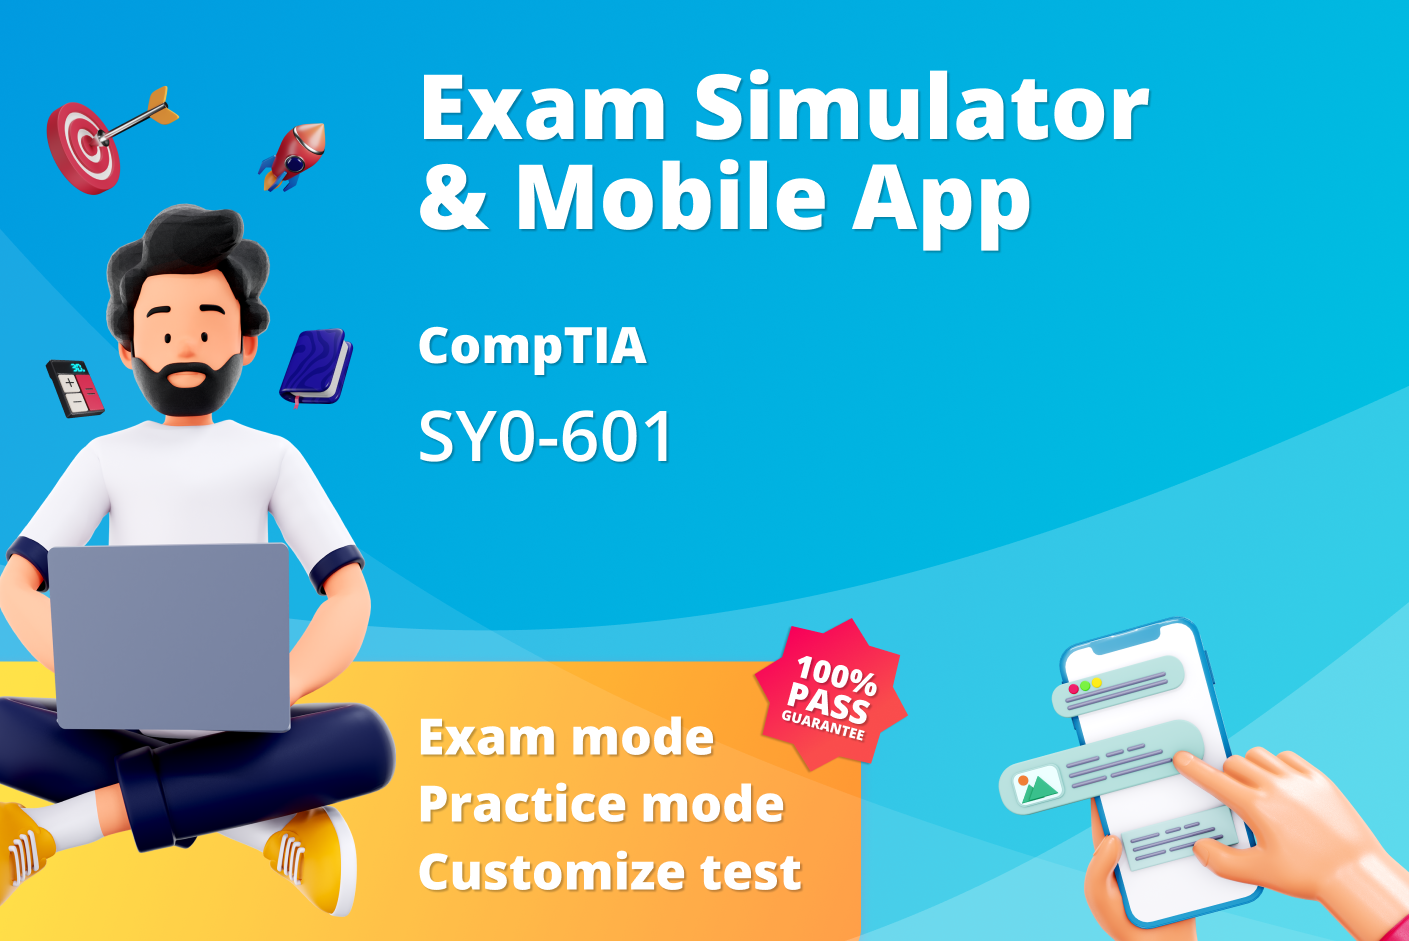 Boost your exam prep with our comprehensive SY0-601 mock exams designed to enhance your knowledge and test-taking skills